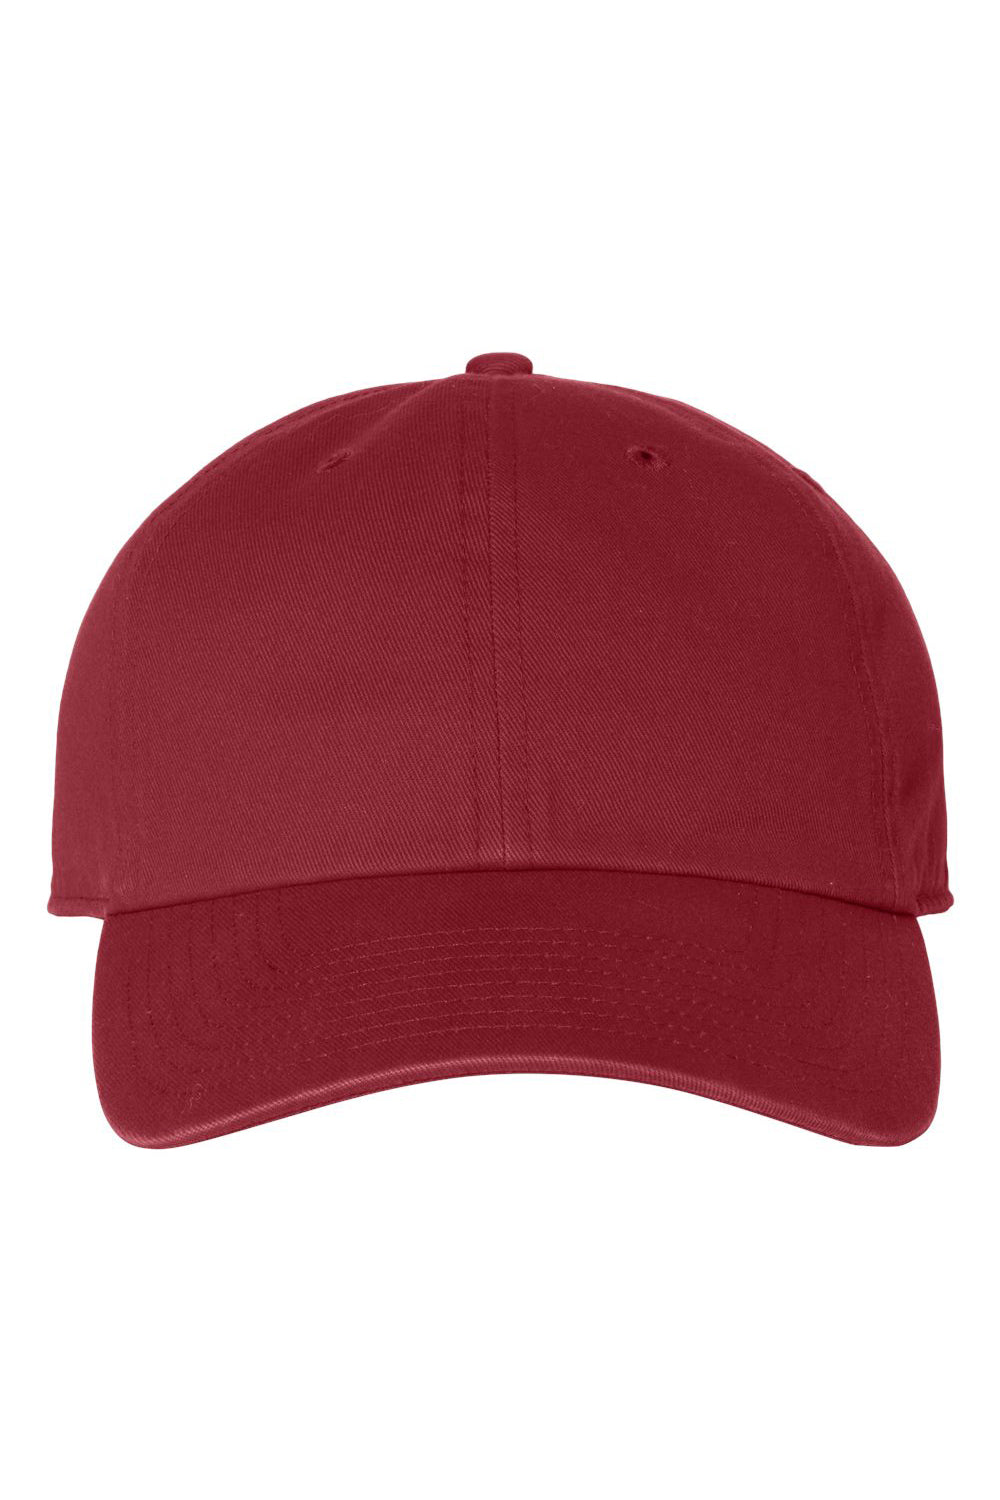 47 Brand 4700 Mens Clean Up Adjustable Hat Cardinal Red Flat Front